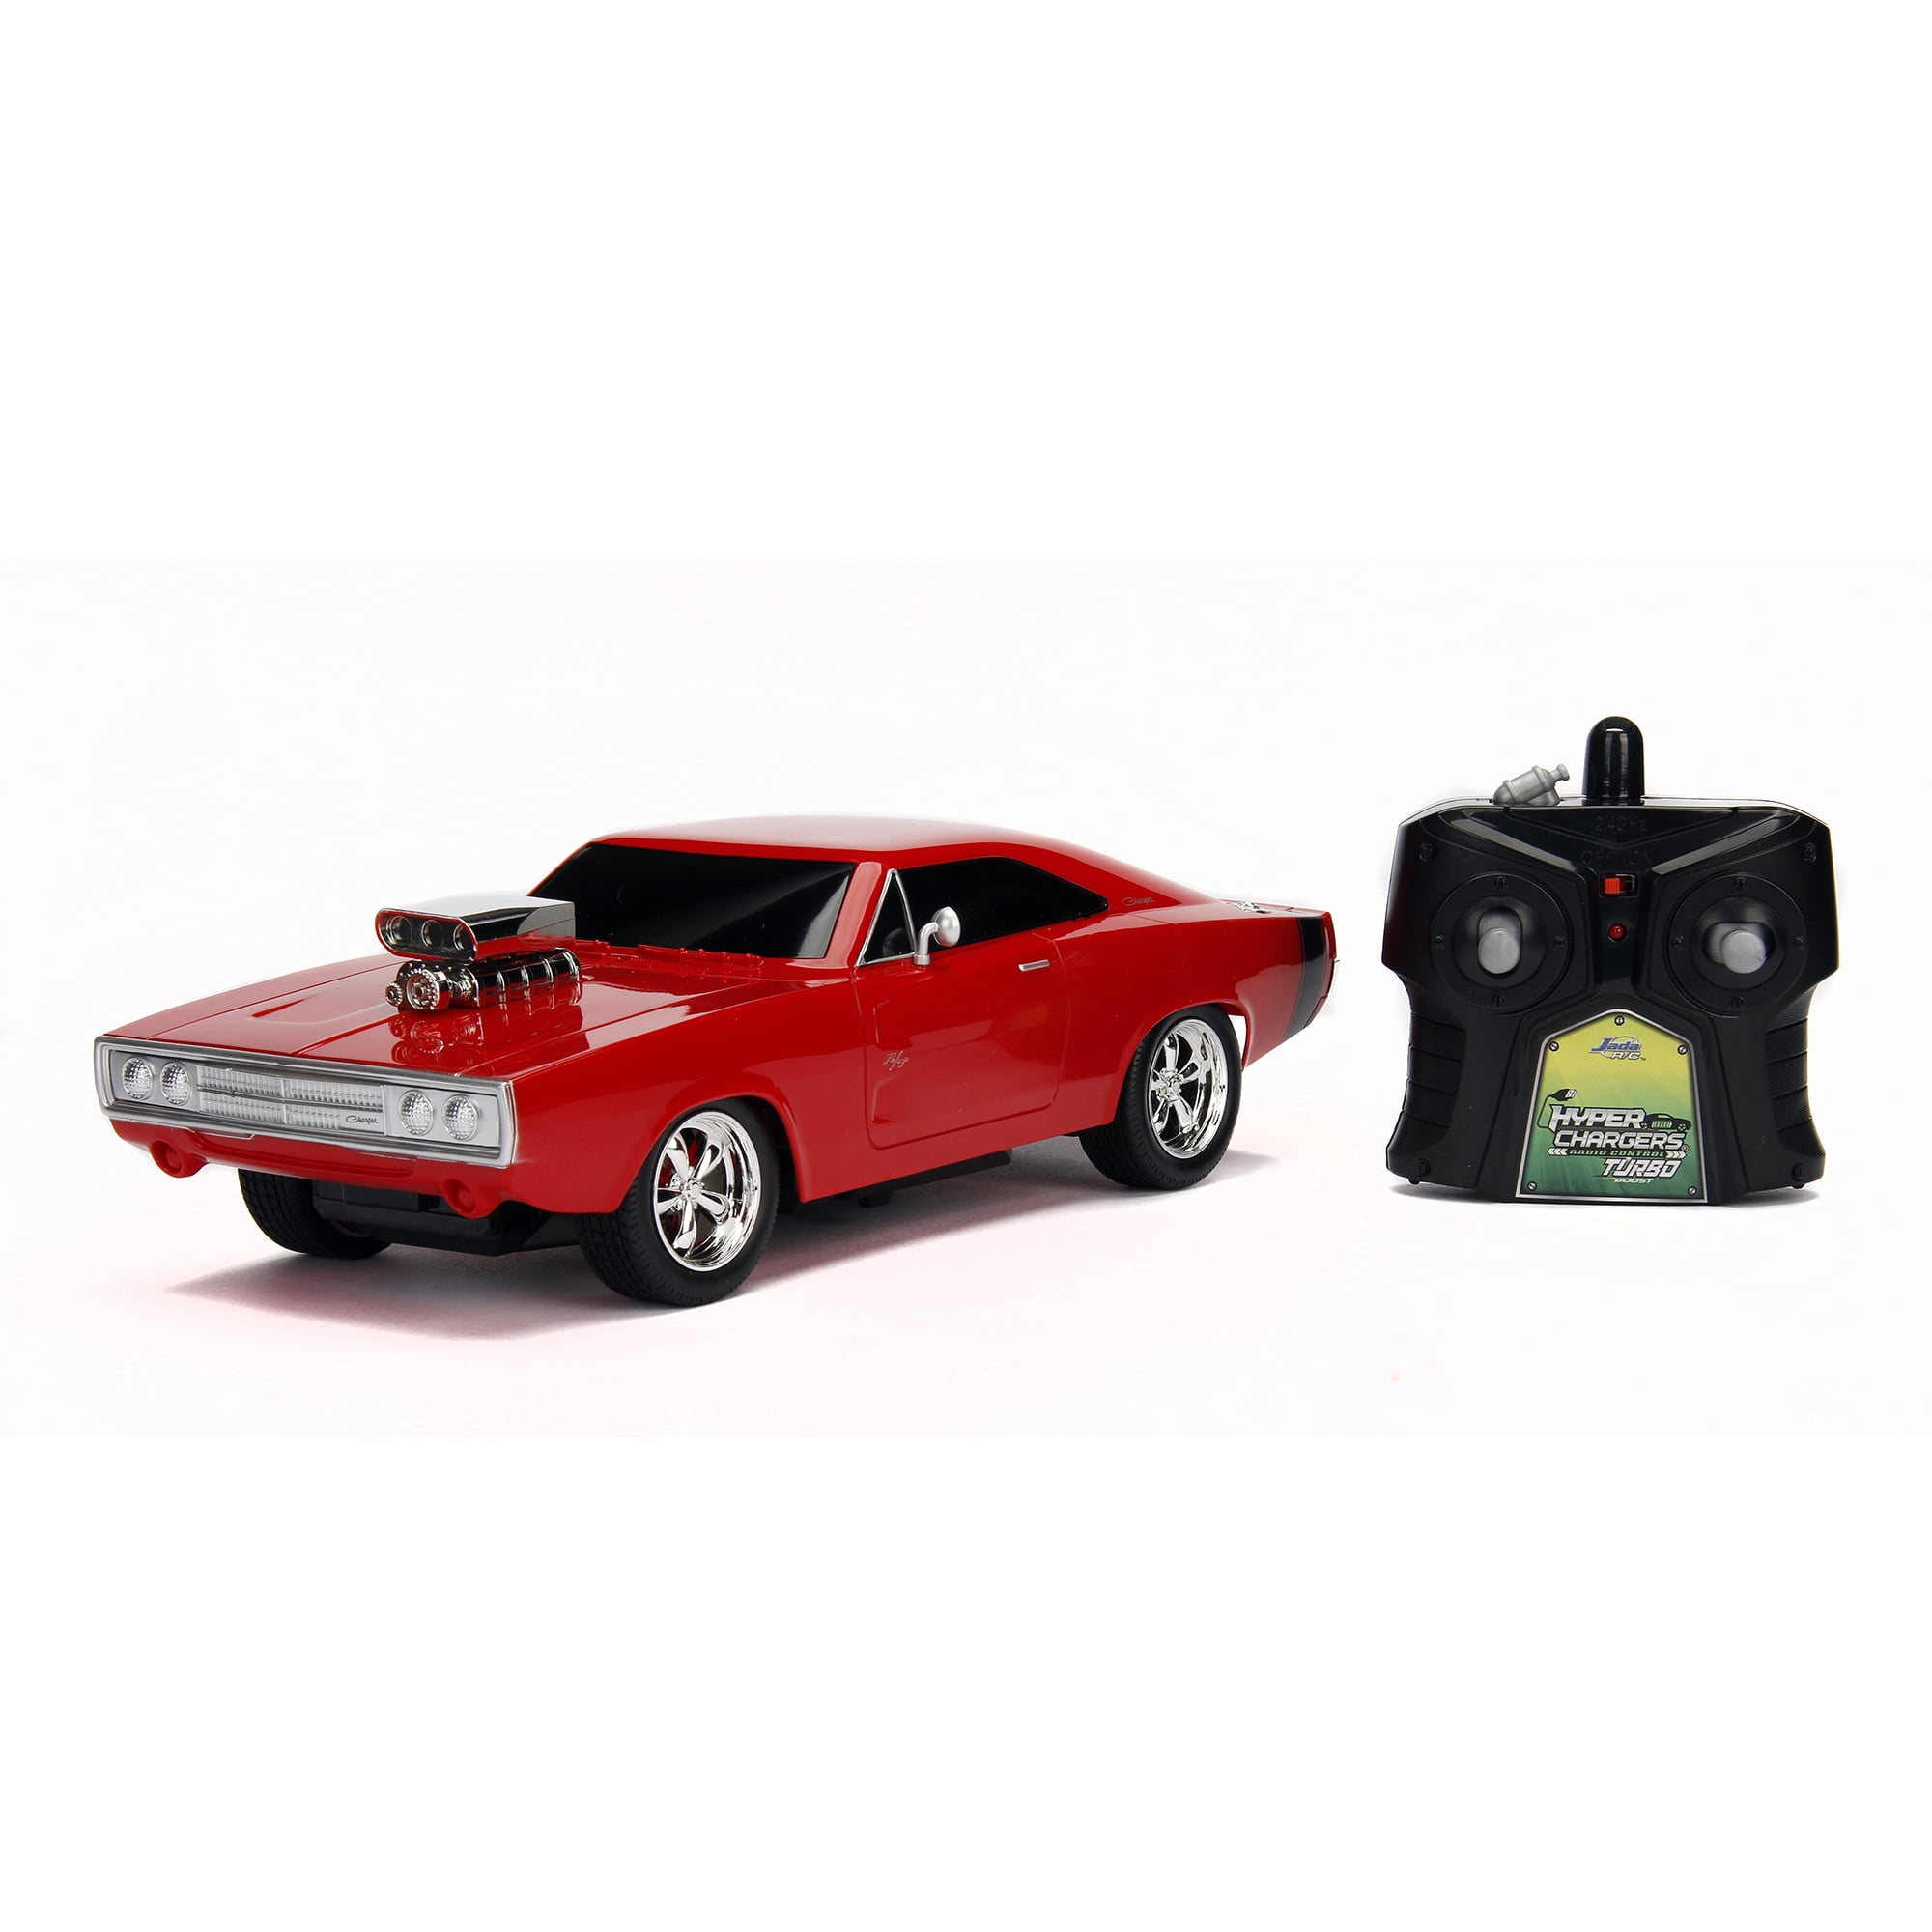 Ice Charger Vehicles Jada Toys Fast & Furious 8 7.5 RC